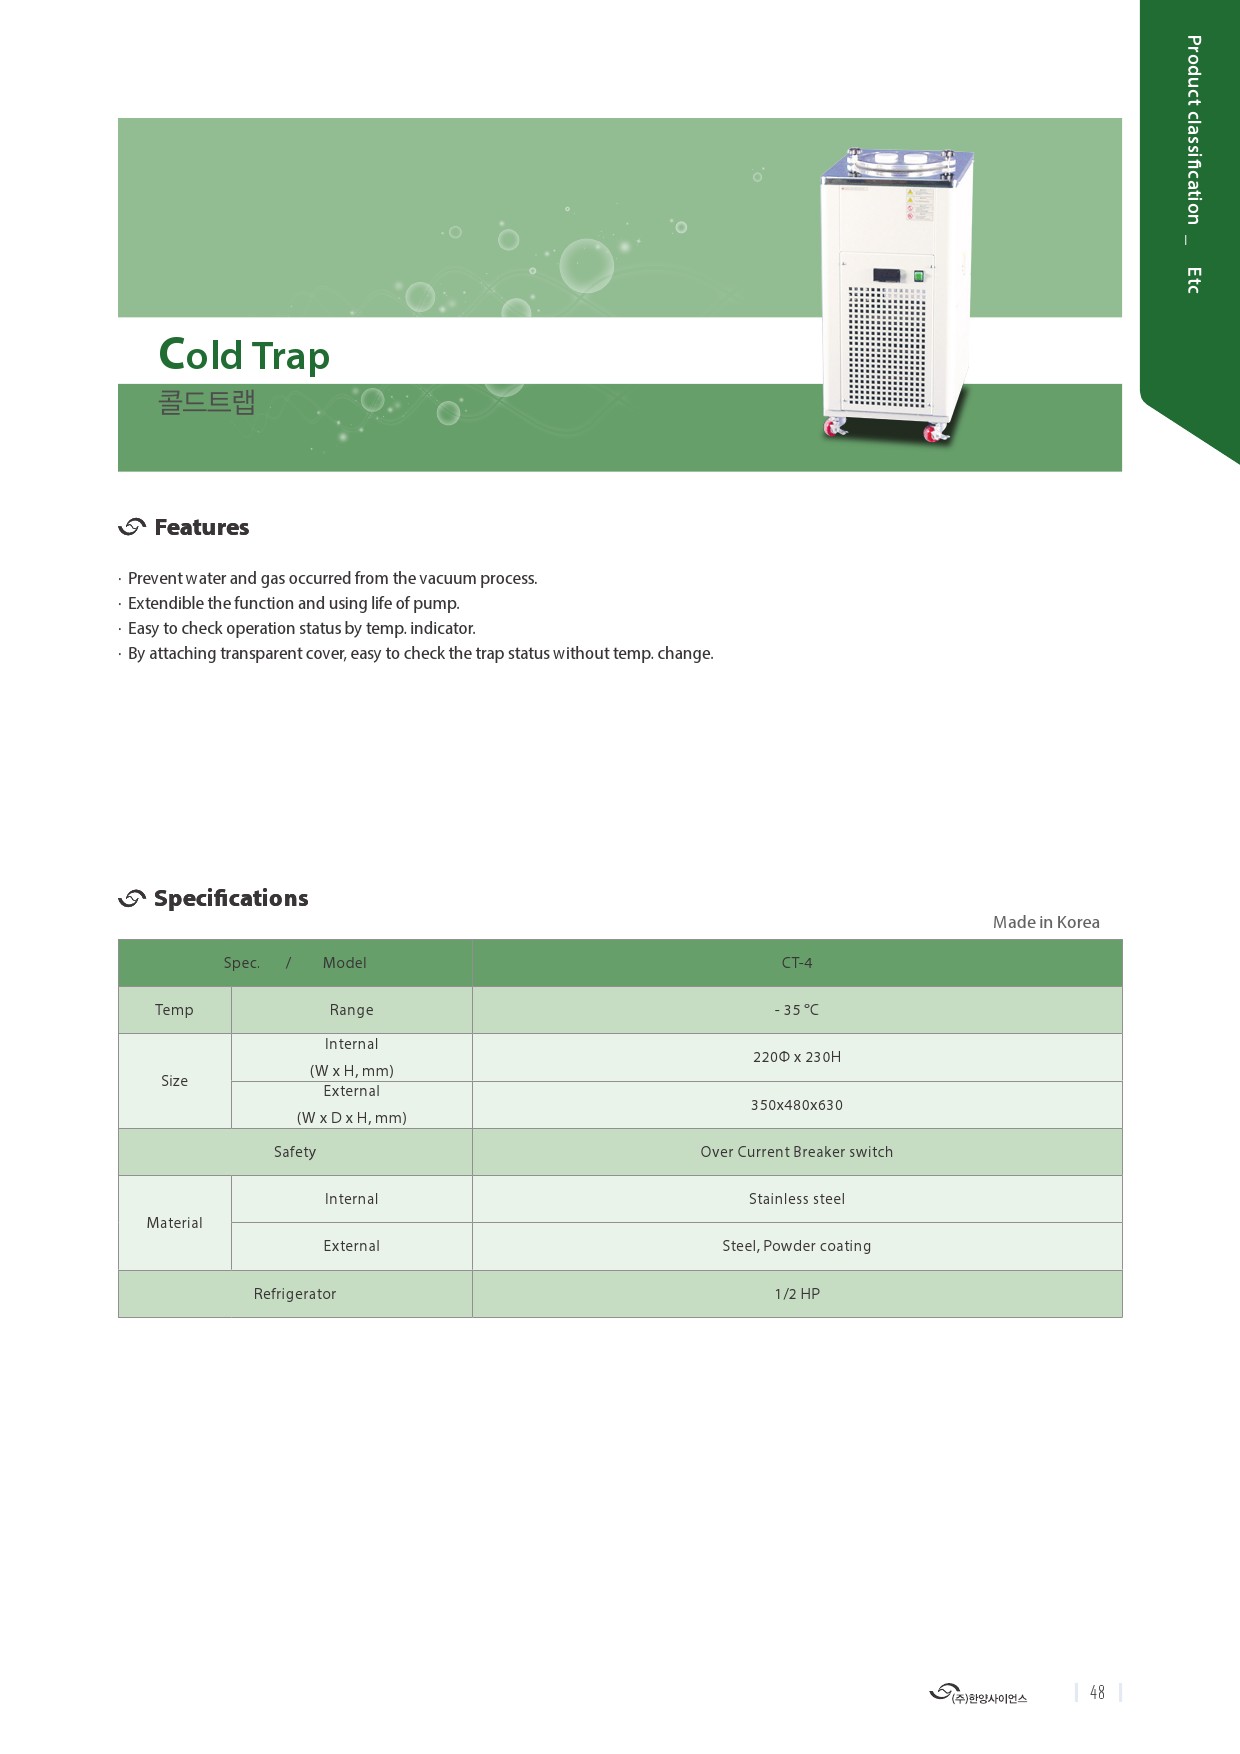 HYSC_Introduction_Cold Trap-1.jpg